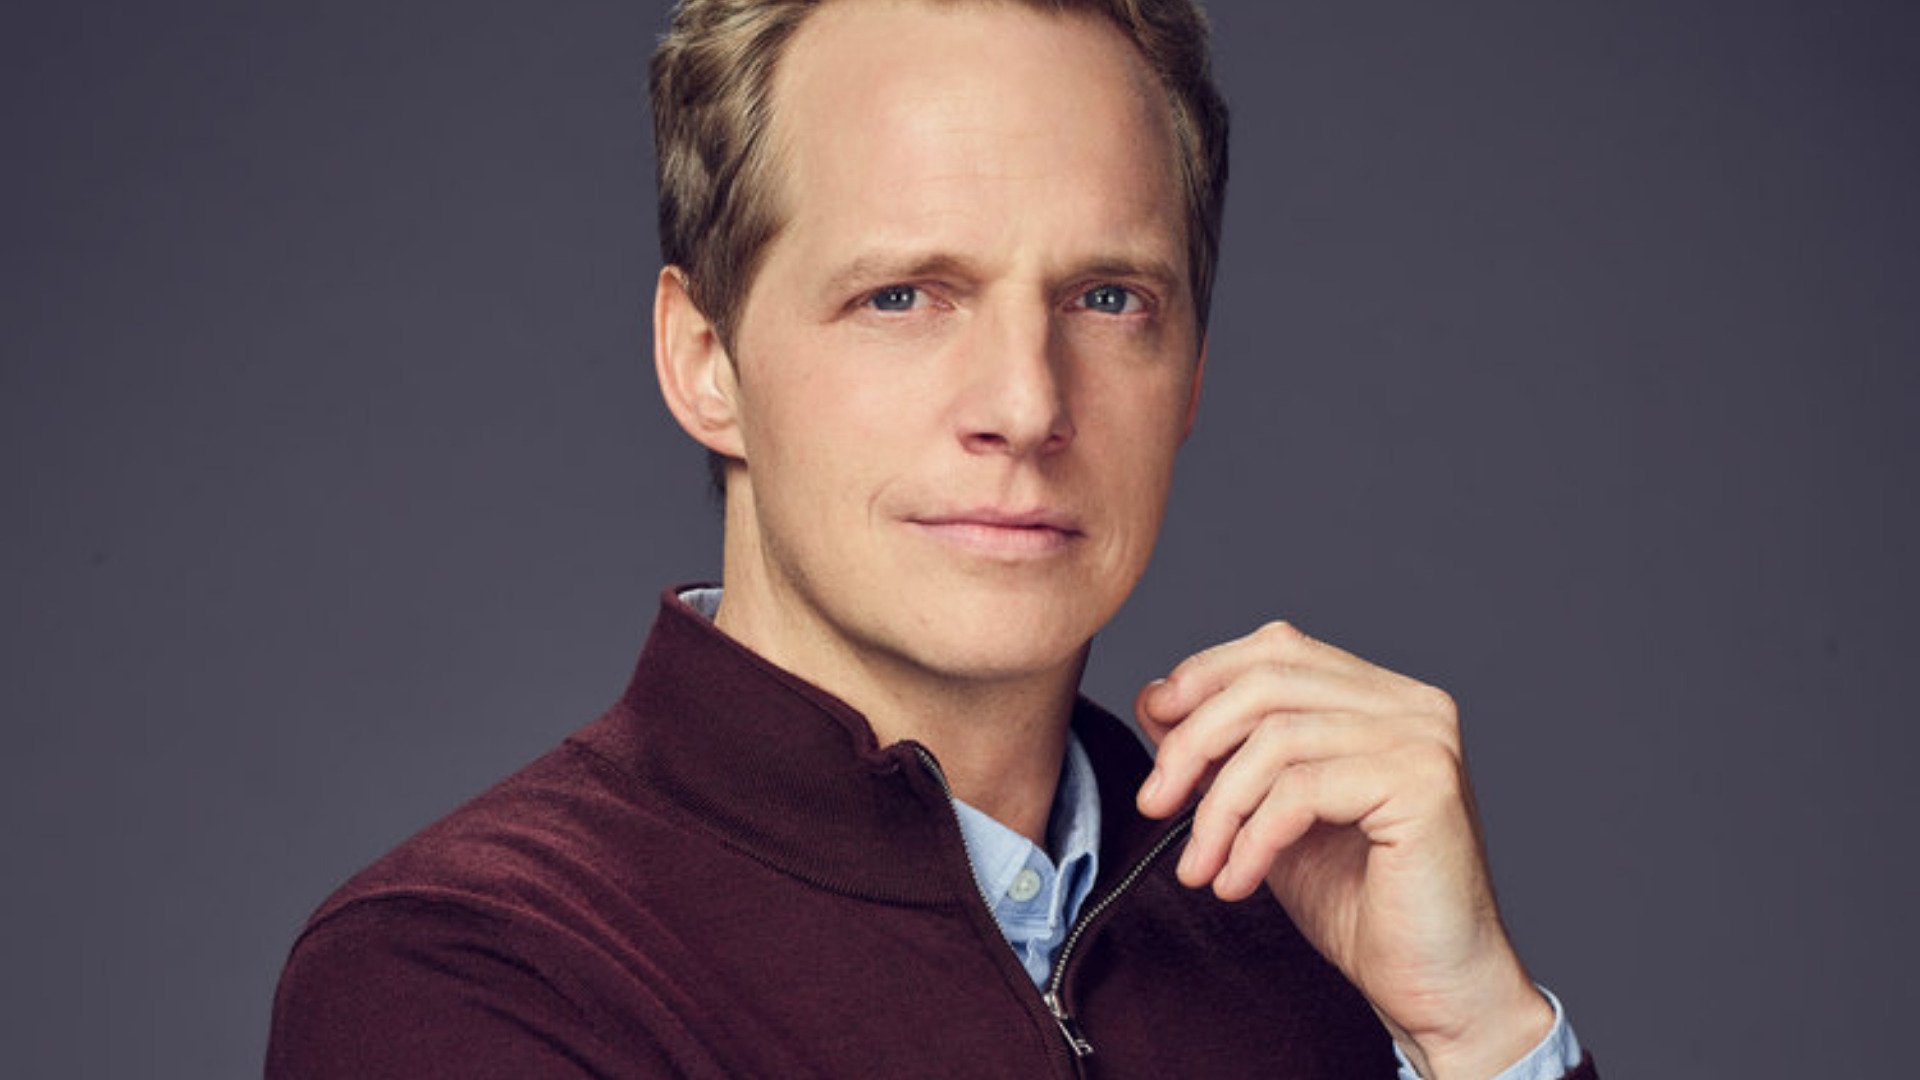 ‘This Is Us’: Who Is Phillip? Chris Geere Plays Kate’s New Love Interest in Season 6